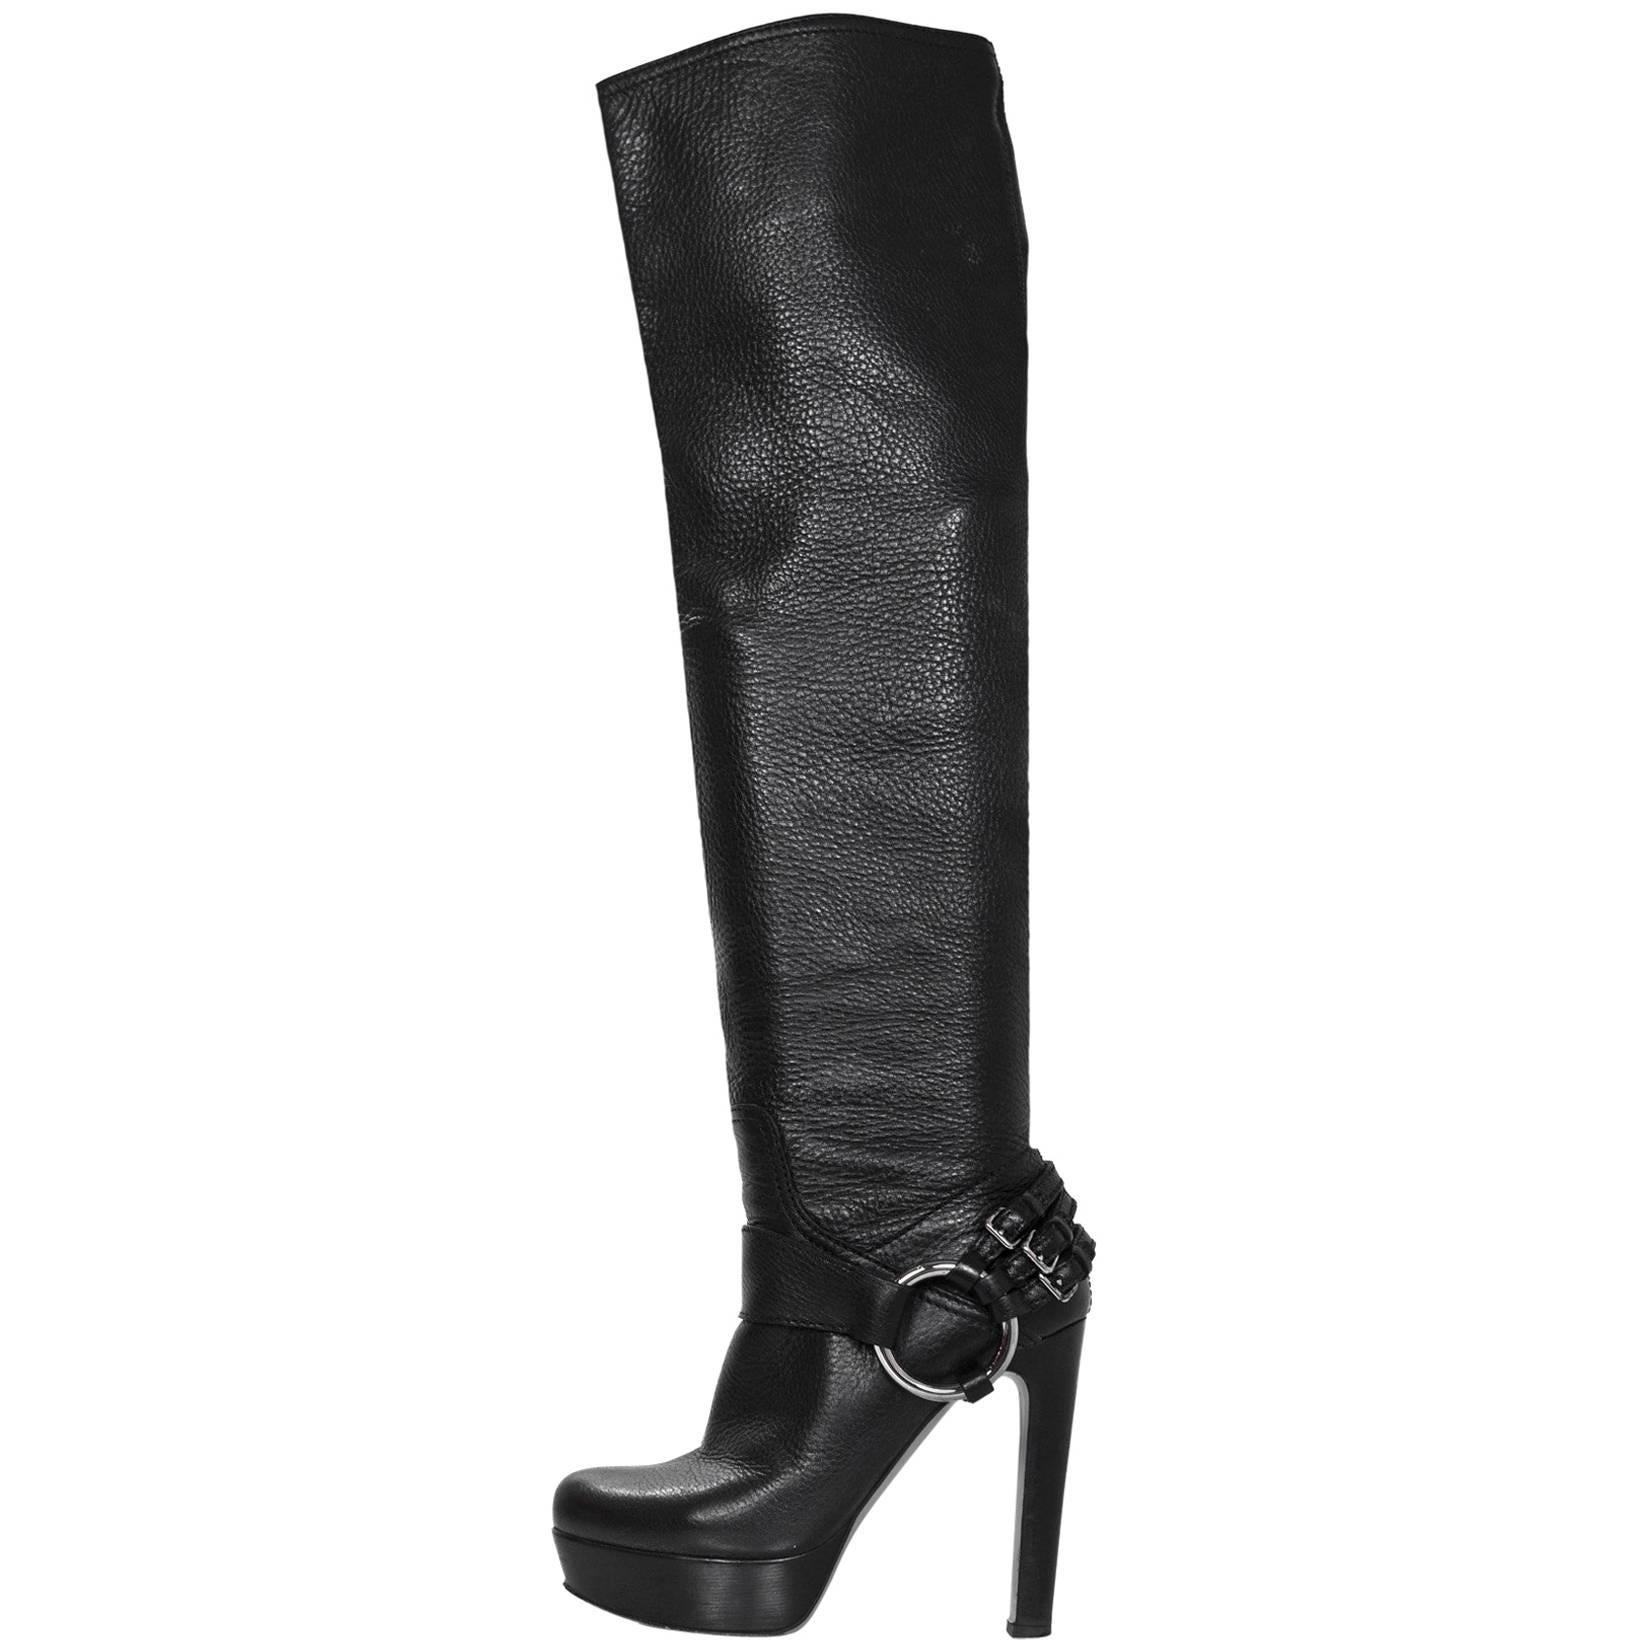 Miu Miu Black Leather Over The Knee Boots Sz 38 with Box and DB